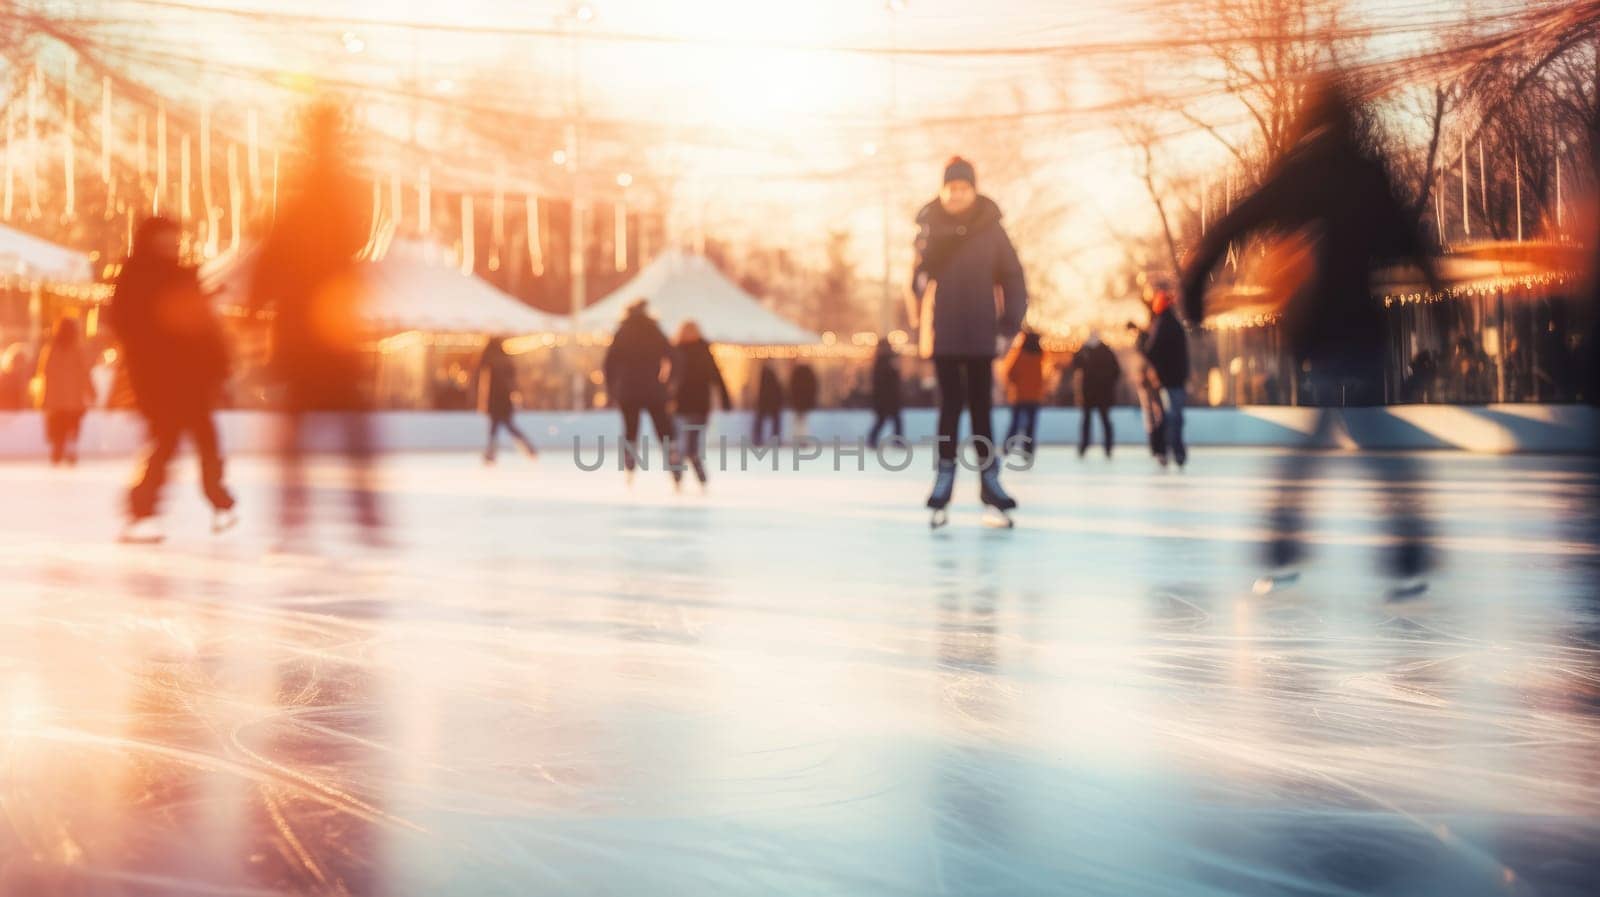 Ice skating rink in winter. Happy moments spent together AI Blurred background